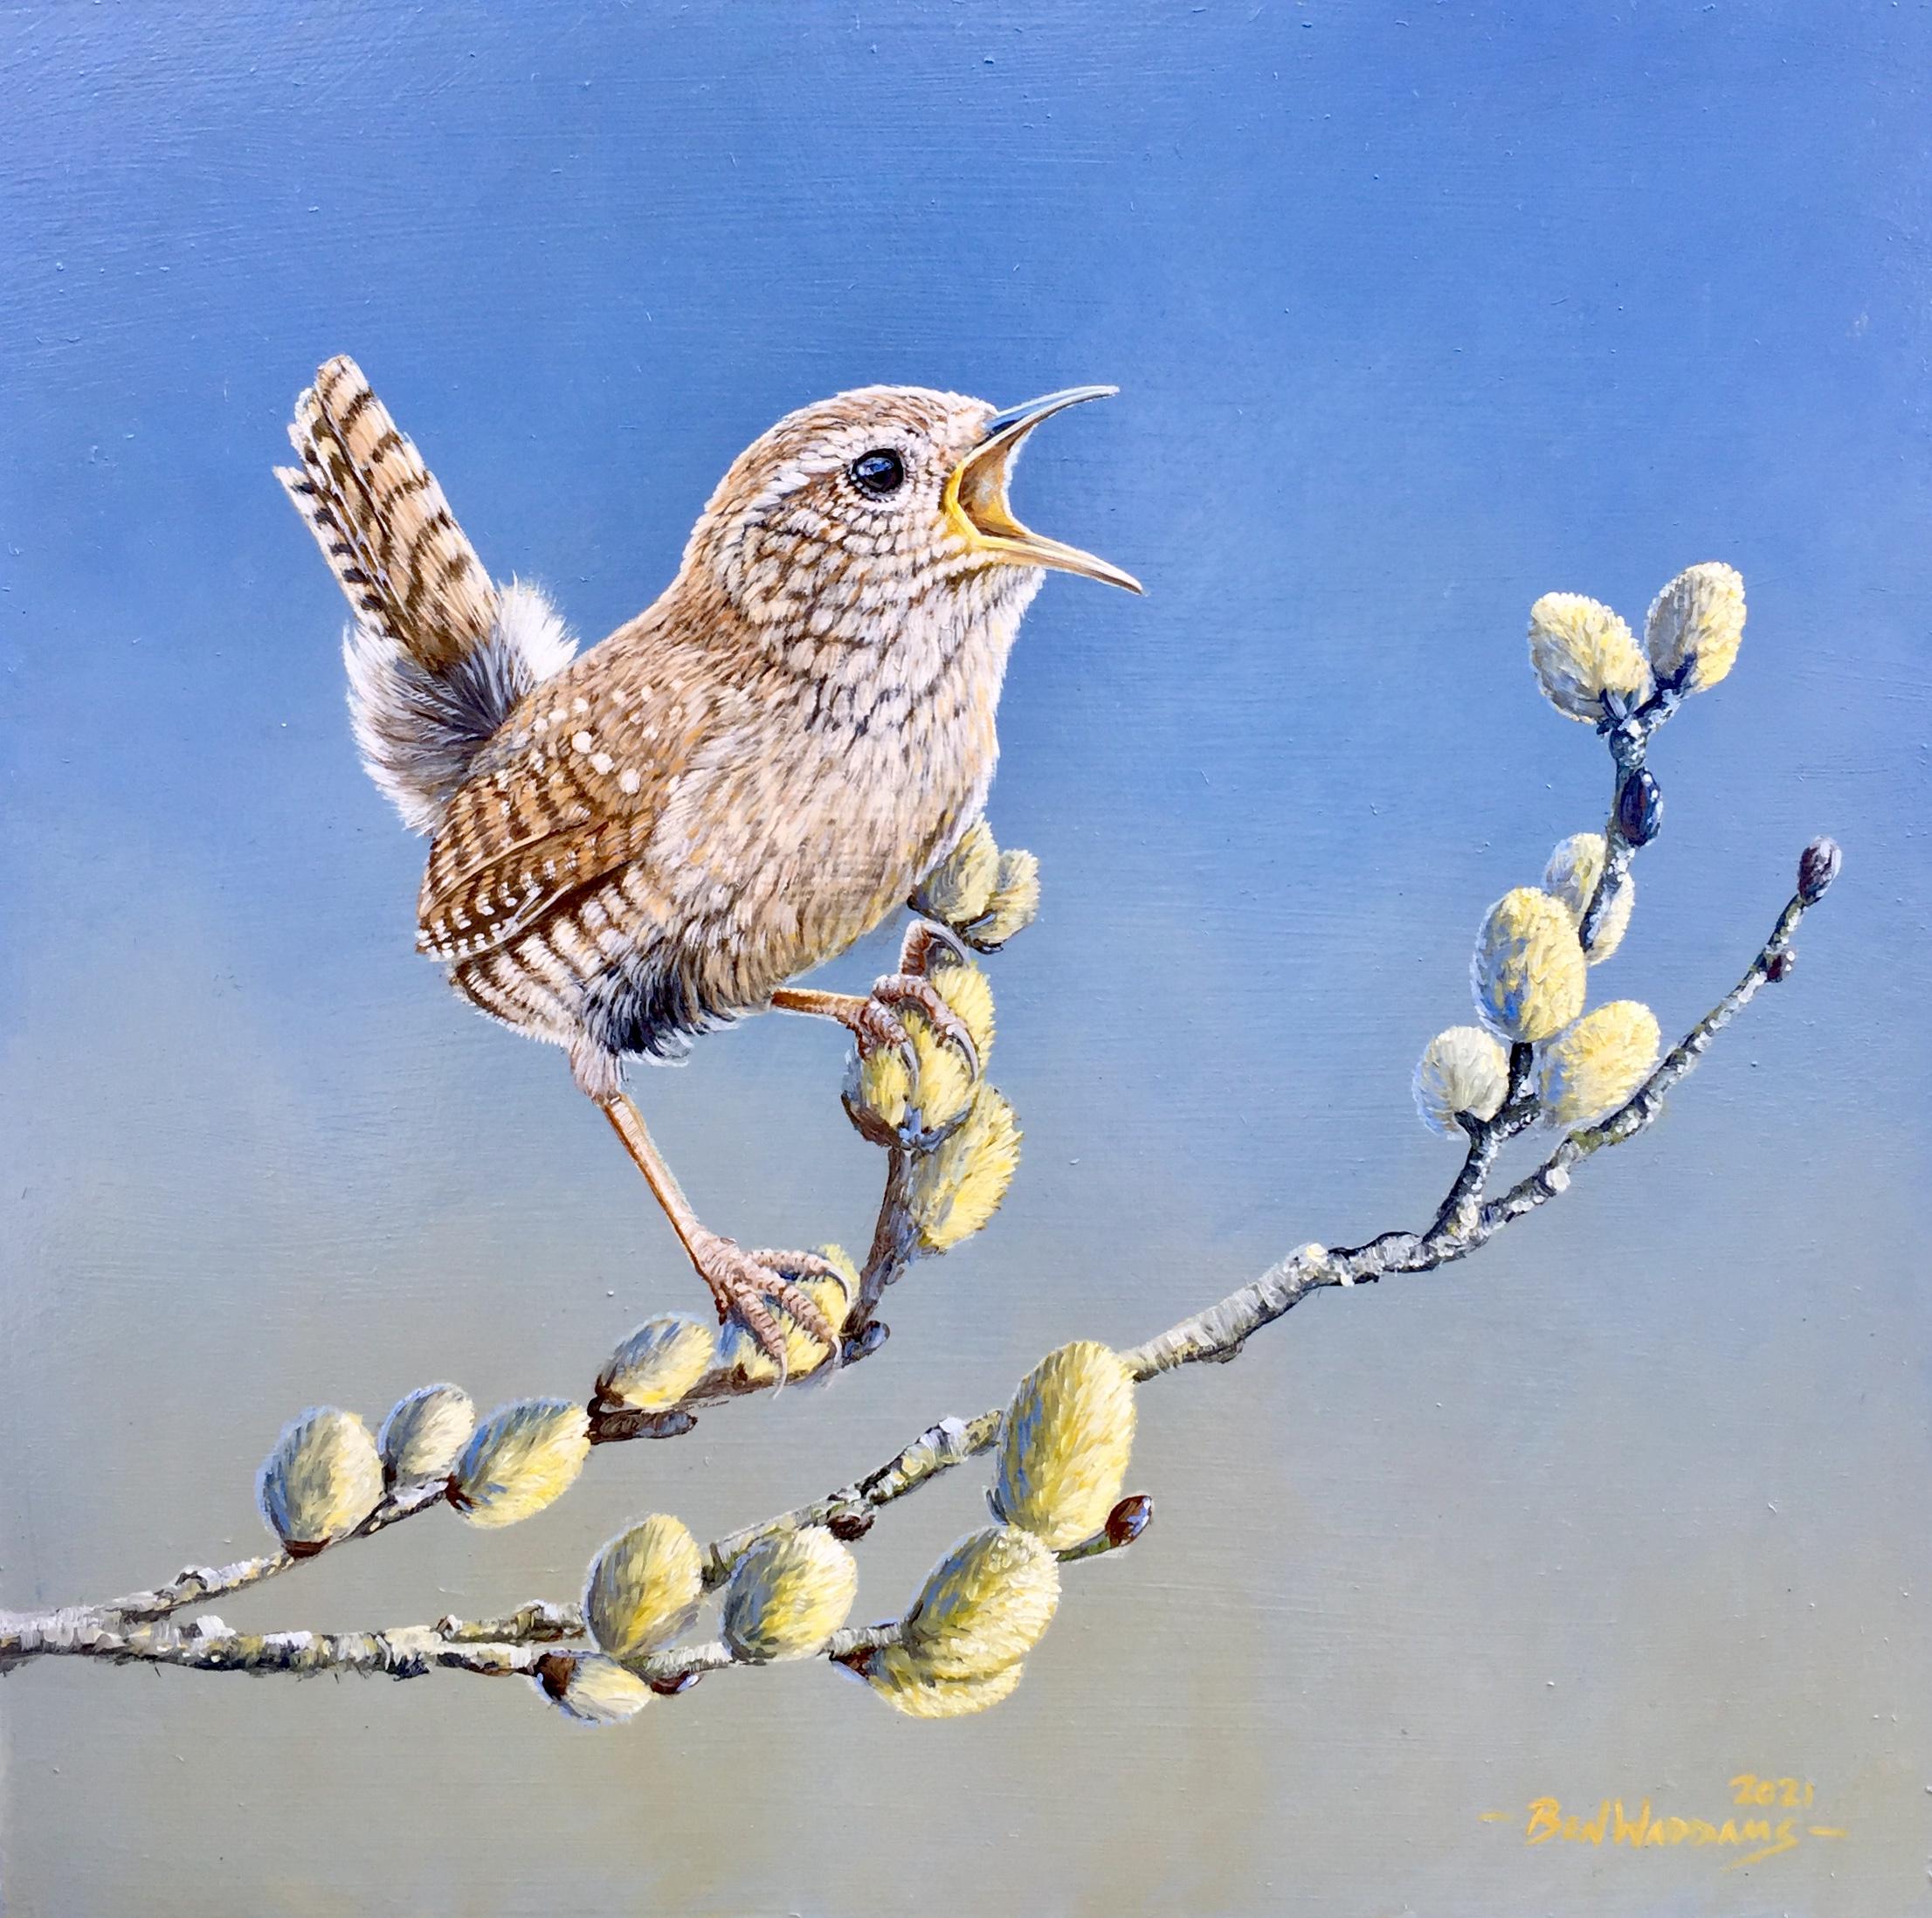 Ben Waddams Animal Painting - 'Ever the Optimist' Contemporary photorealist painting of a Wren small bird wild